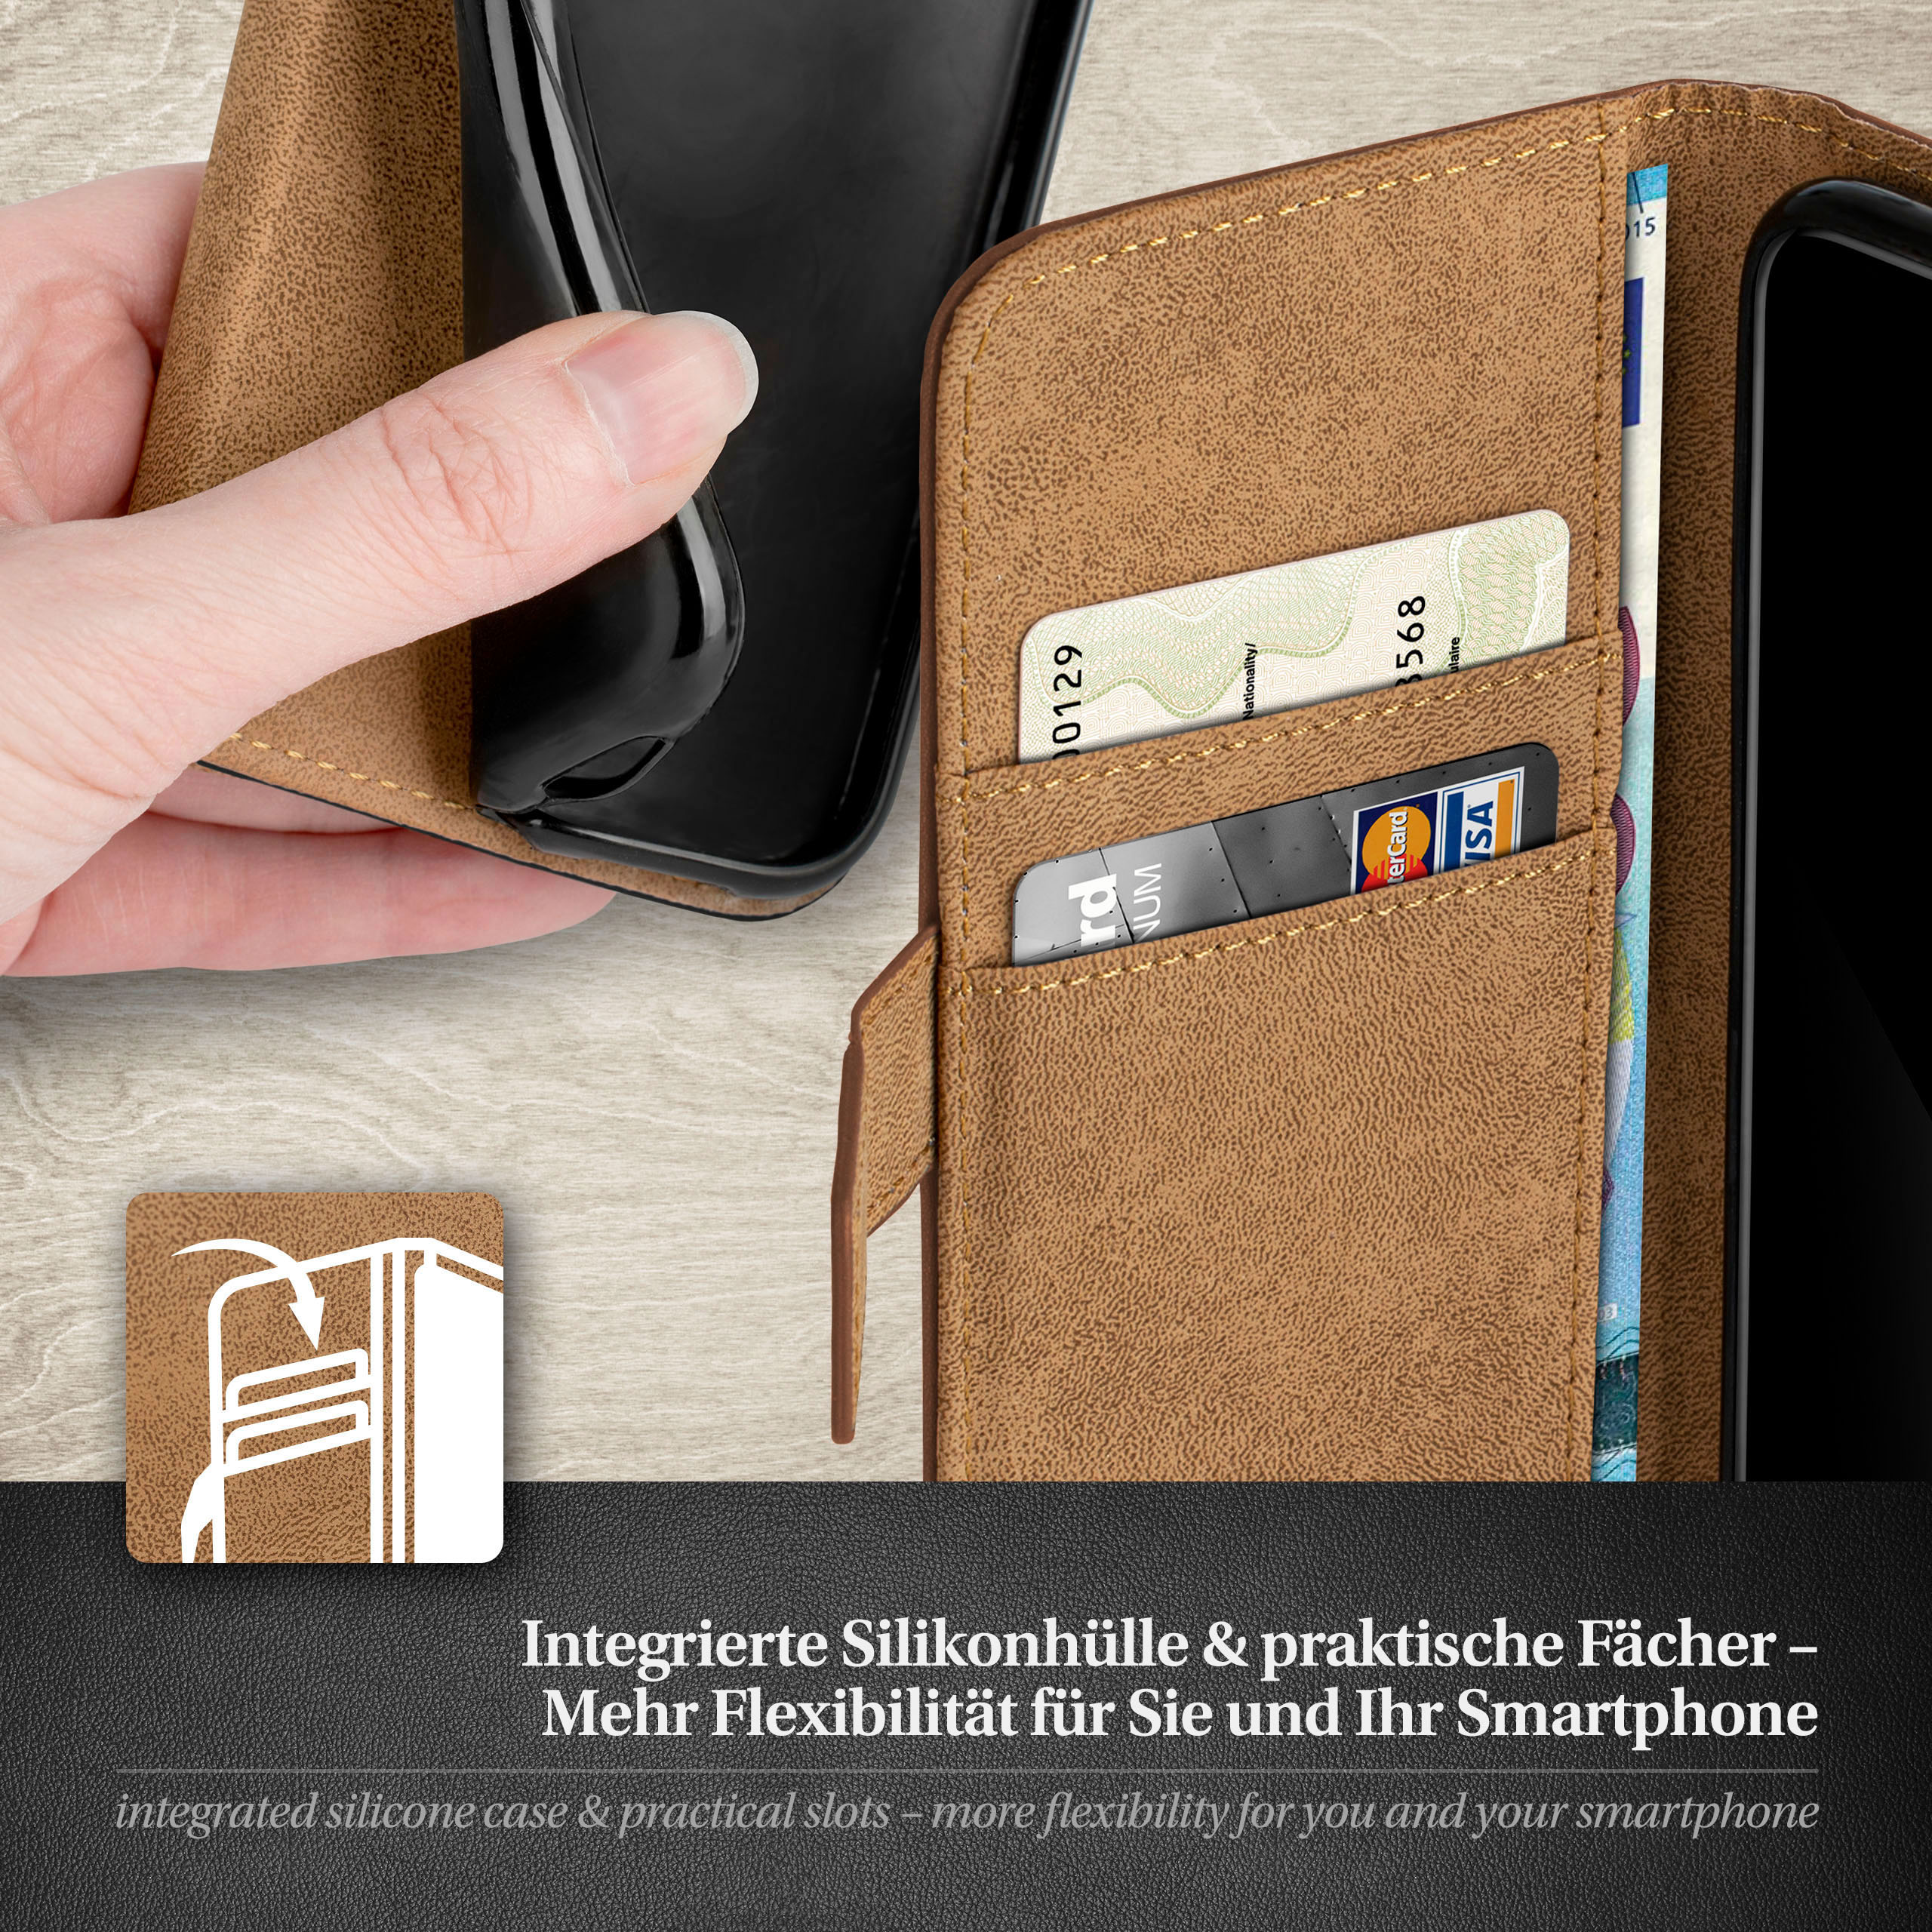 Case, Umber-Brown Bookcover, S3 Samsung, Neo, / Galaxy Book MOEX S3